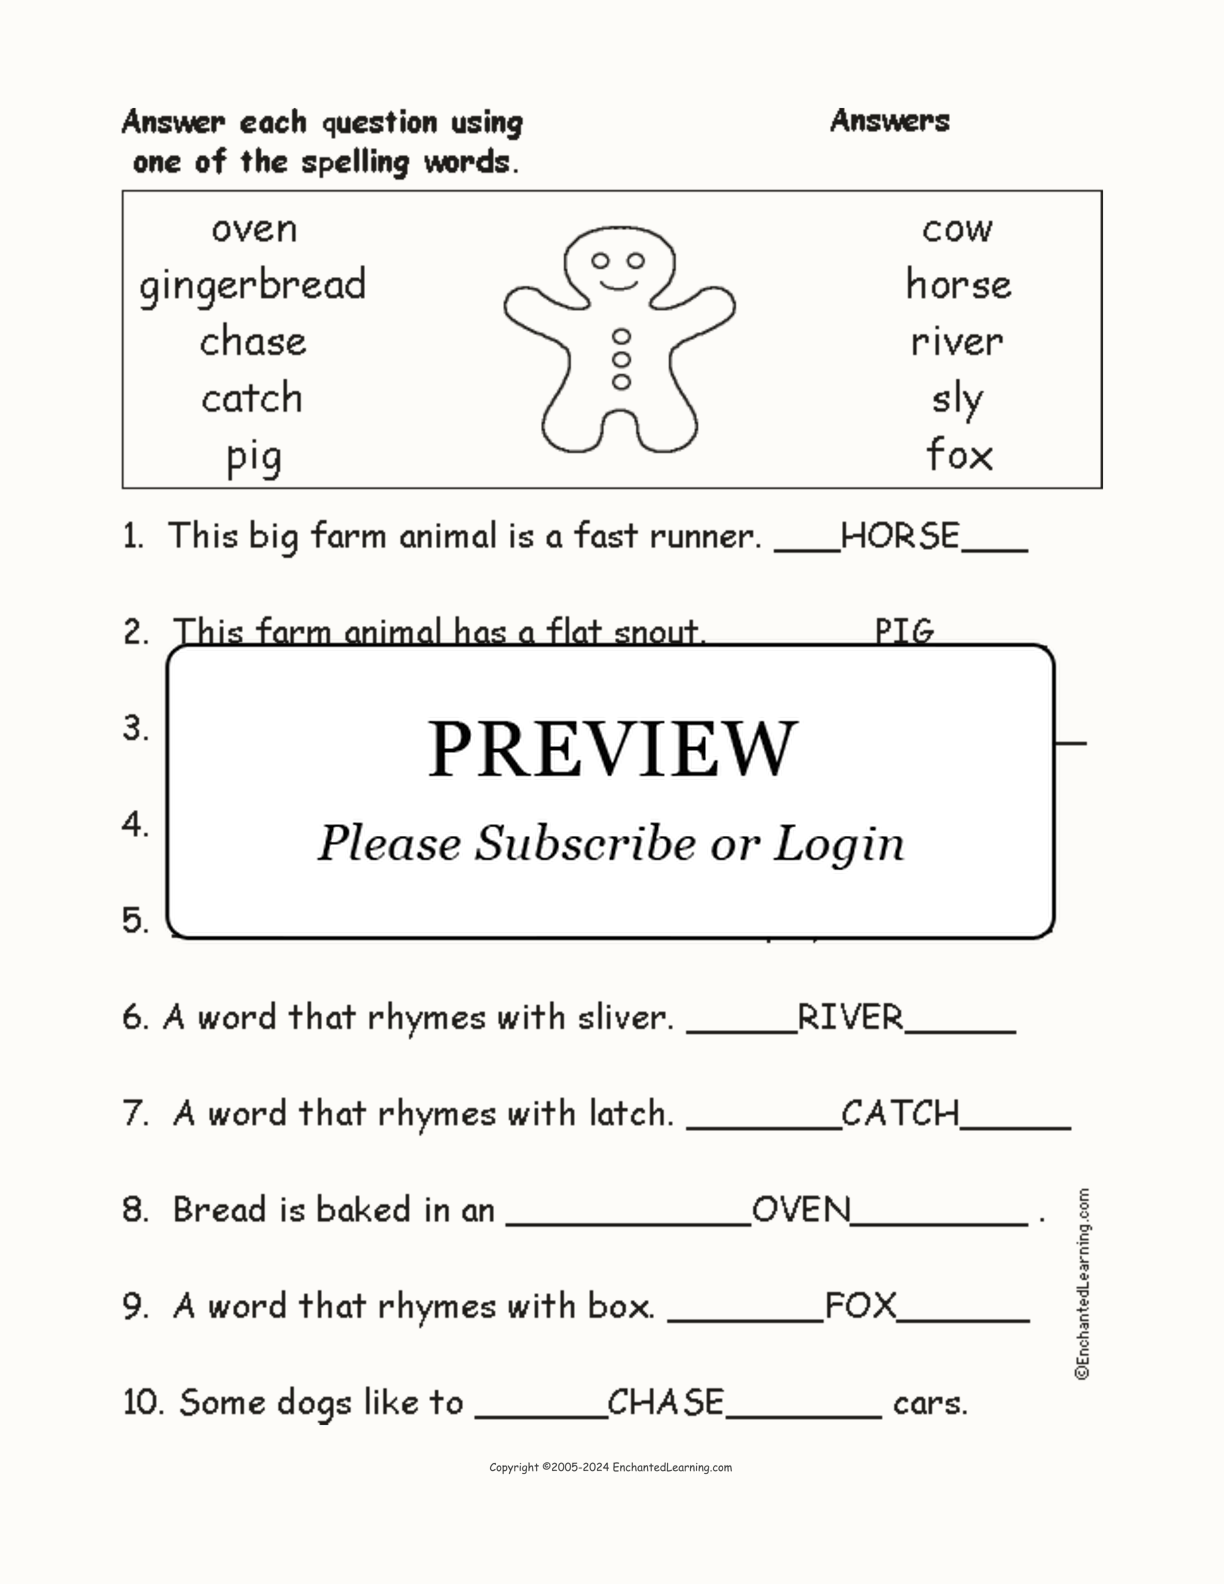 'The Gingerbread Man' Spelling Word Questions interactive worksheet page 2